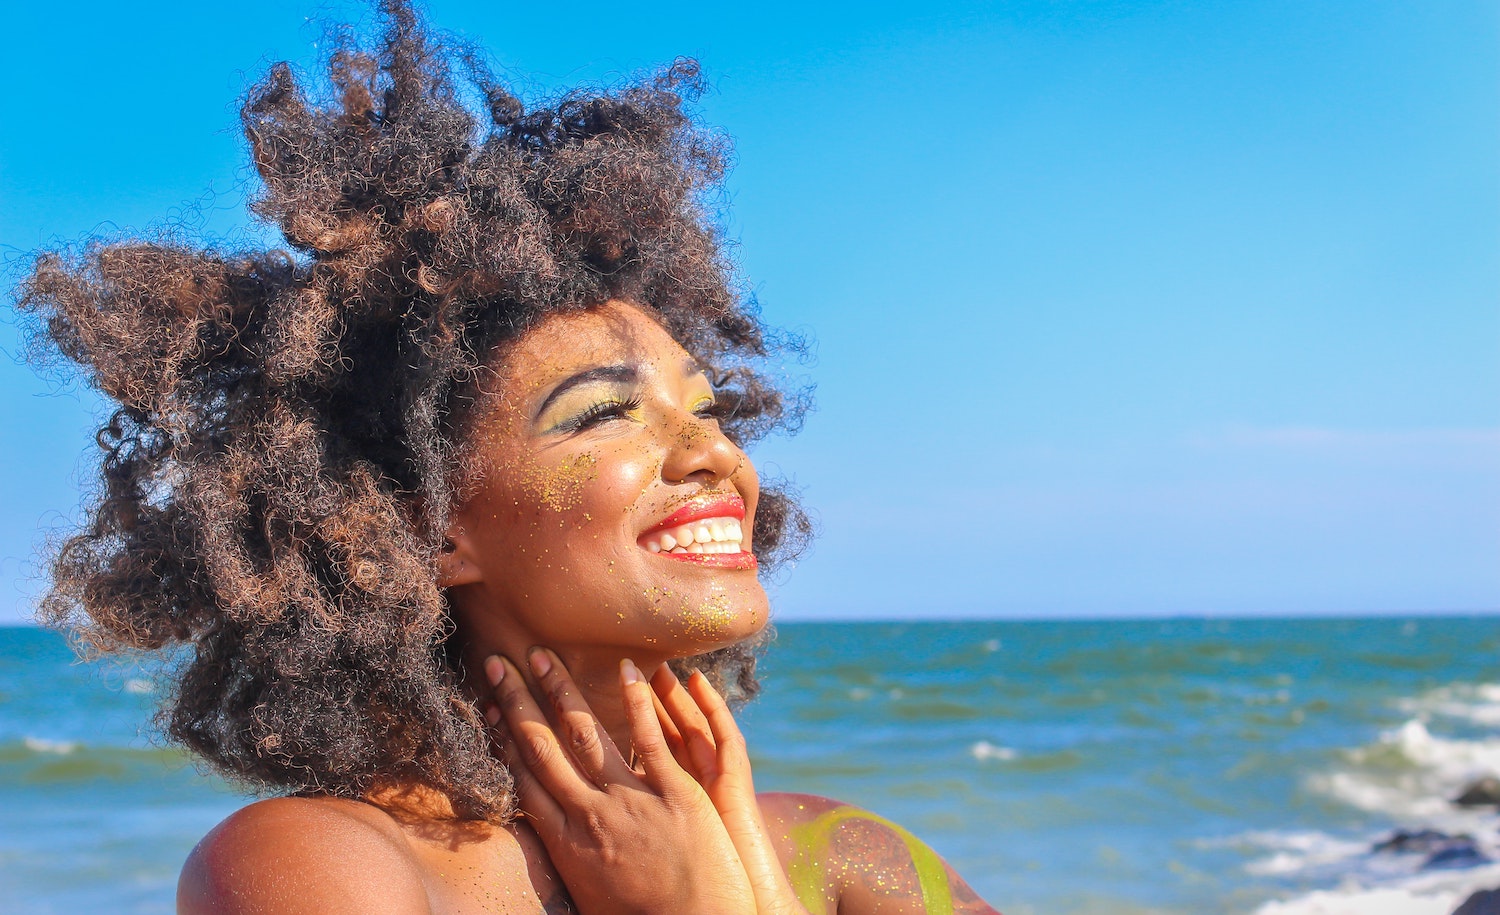 An empath (woman) smiling in the sunshine and living her best life.